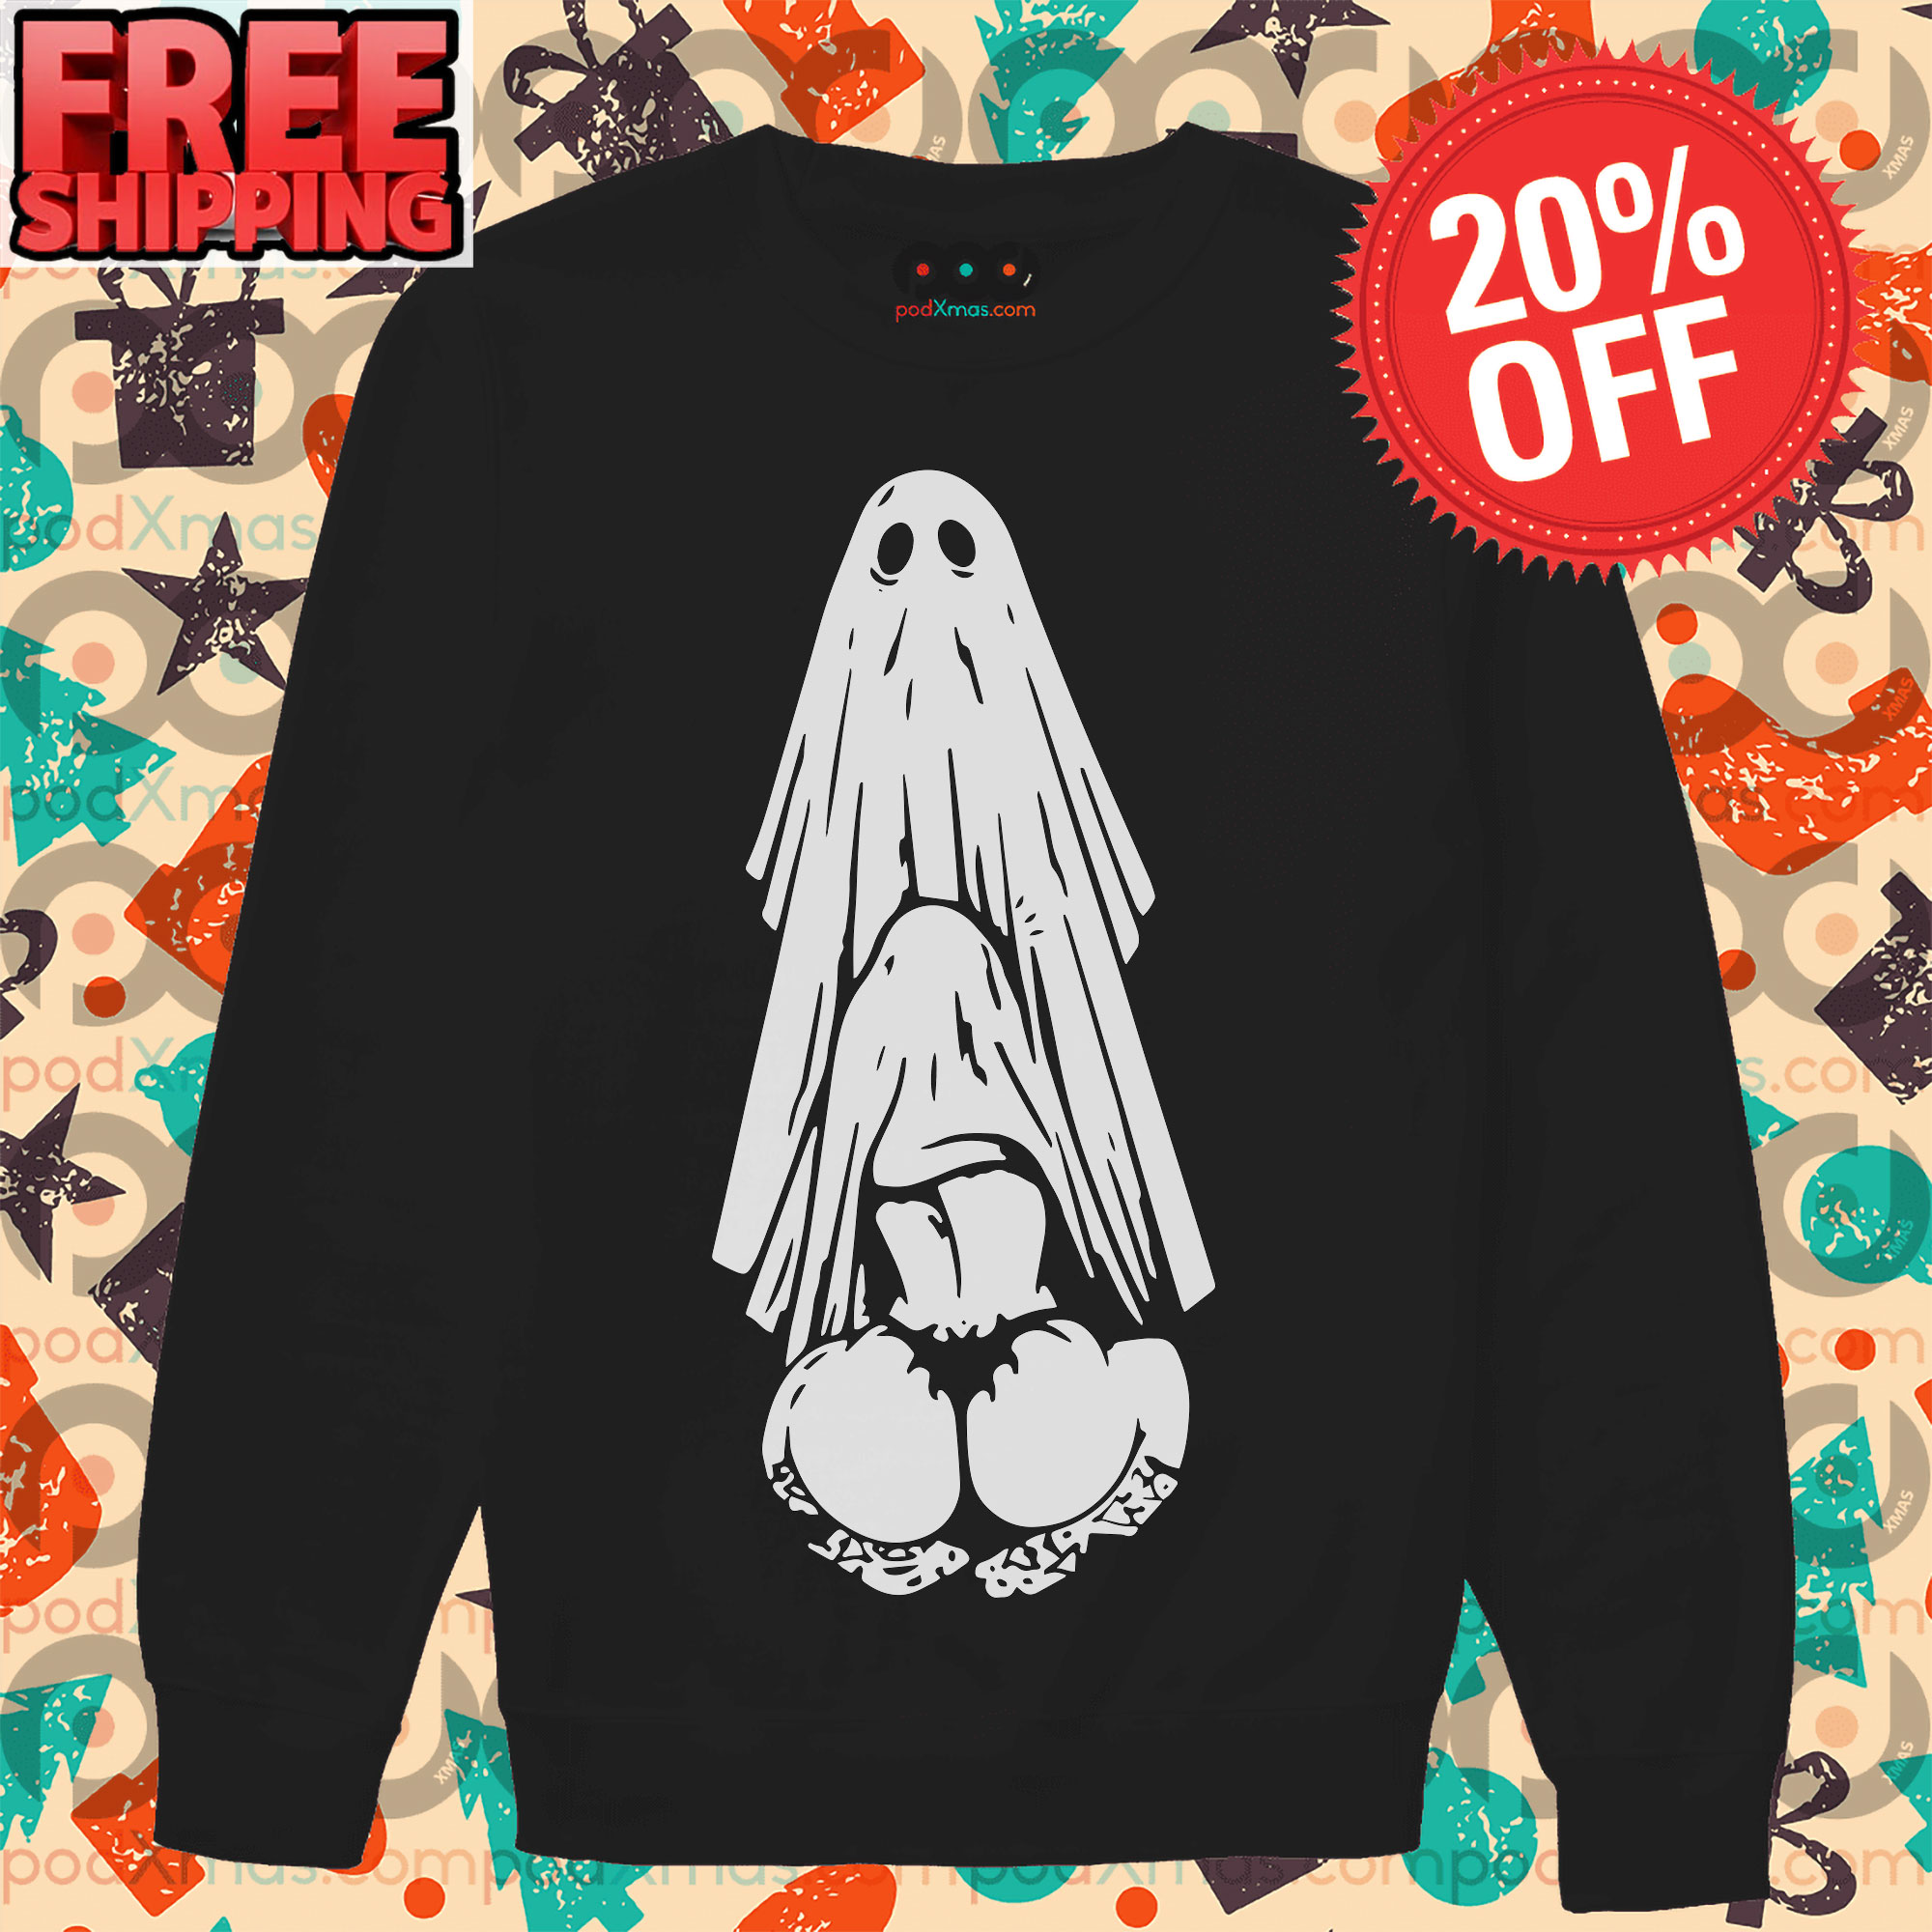 Get Ghost Blowjob Halloween Funny Shirt For Free Shipping • Custom Xmas Gift pic